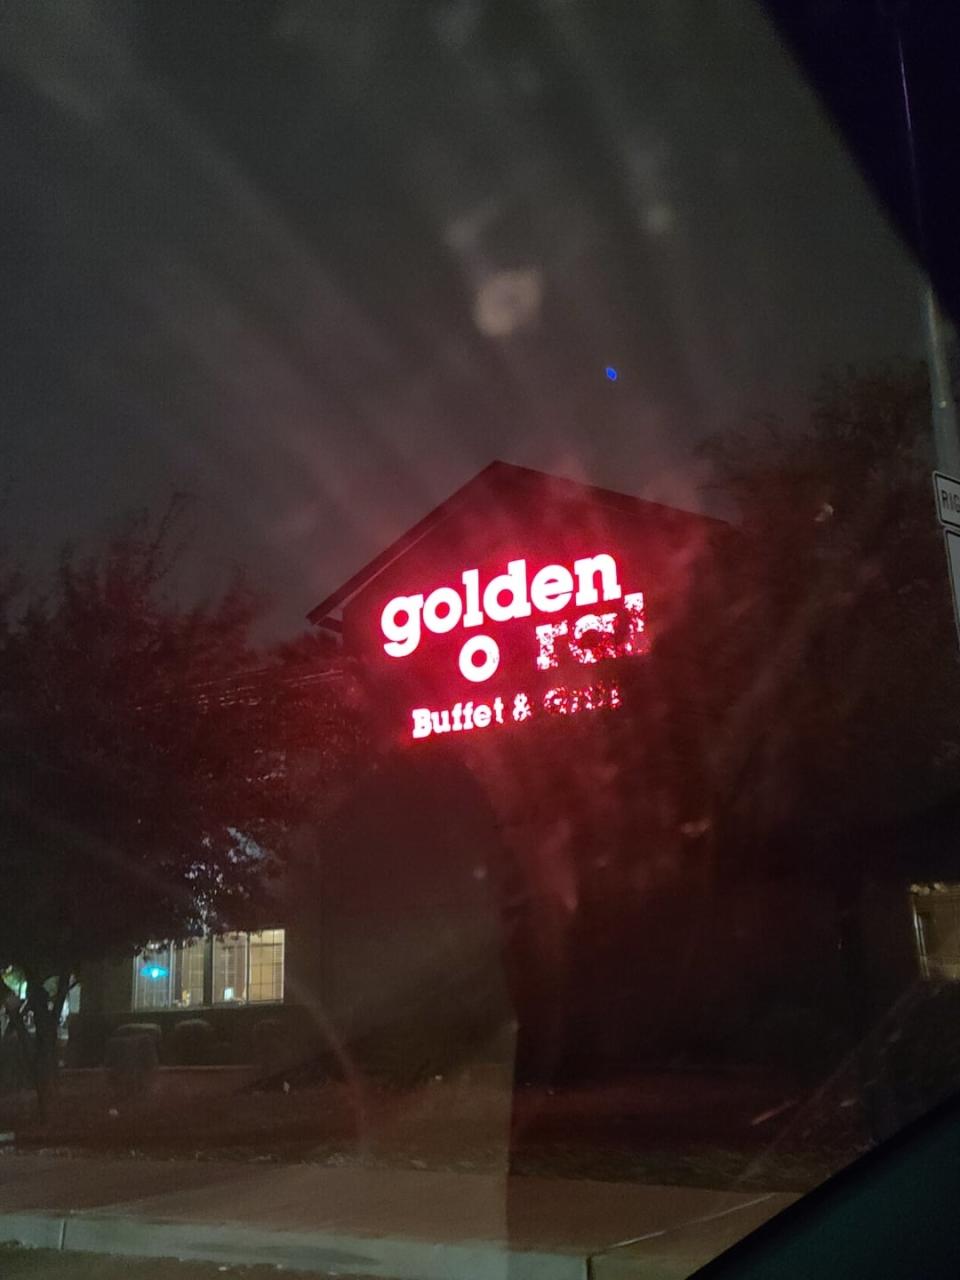 Neon sign of 'Golden Corral Buffet & Grill' reads 